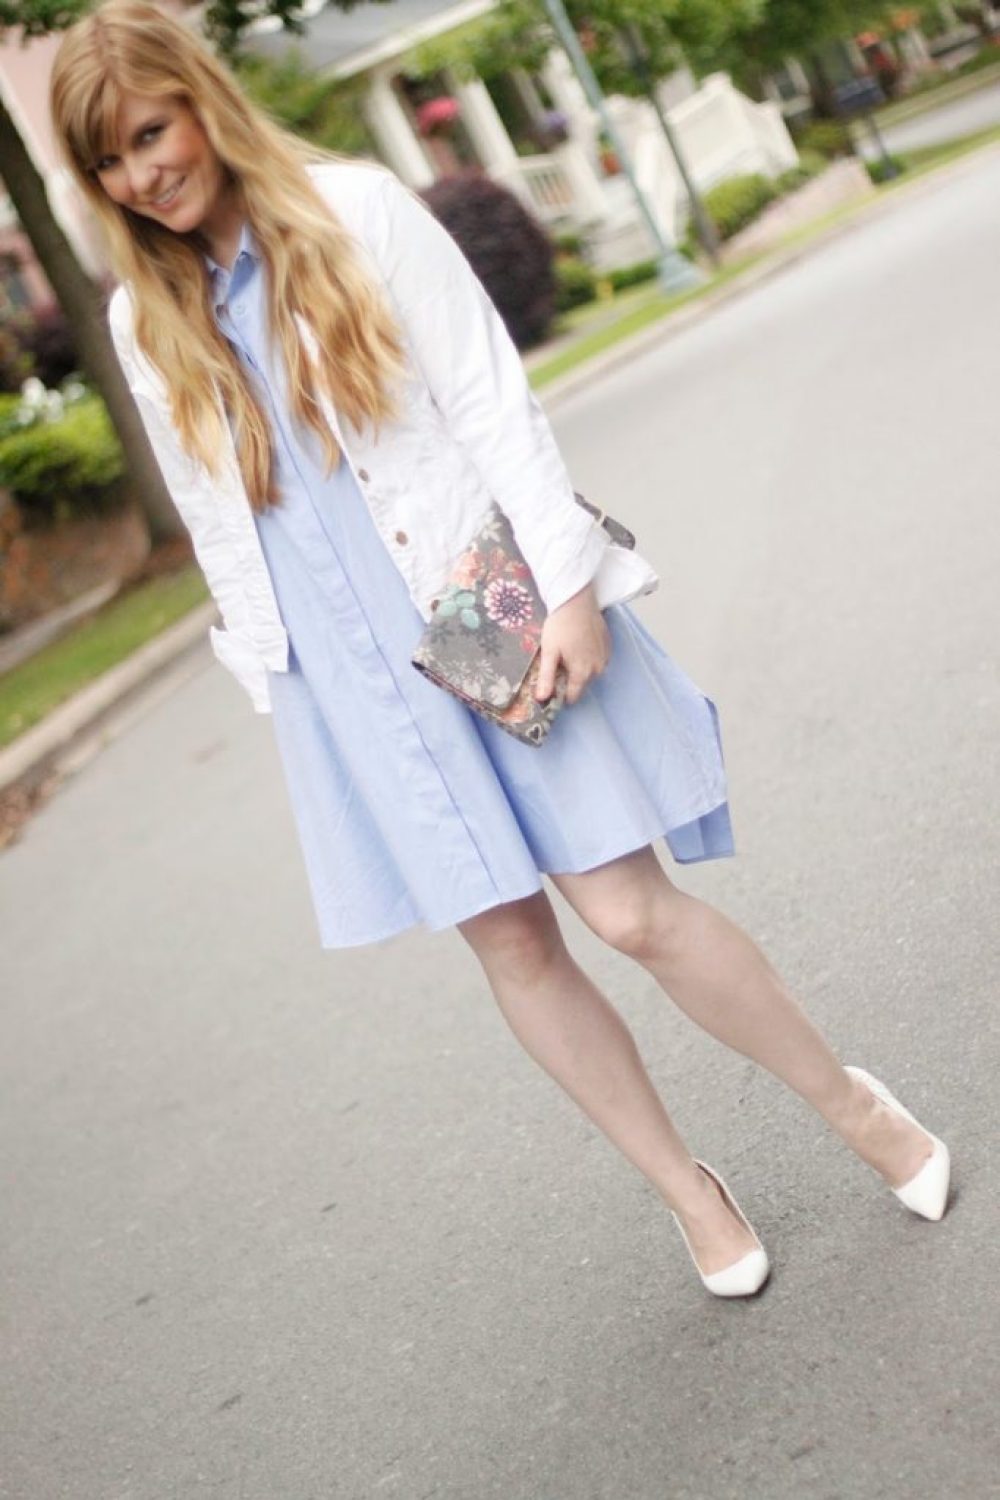 How I Wore My Heels: The Shirtdress